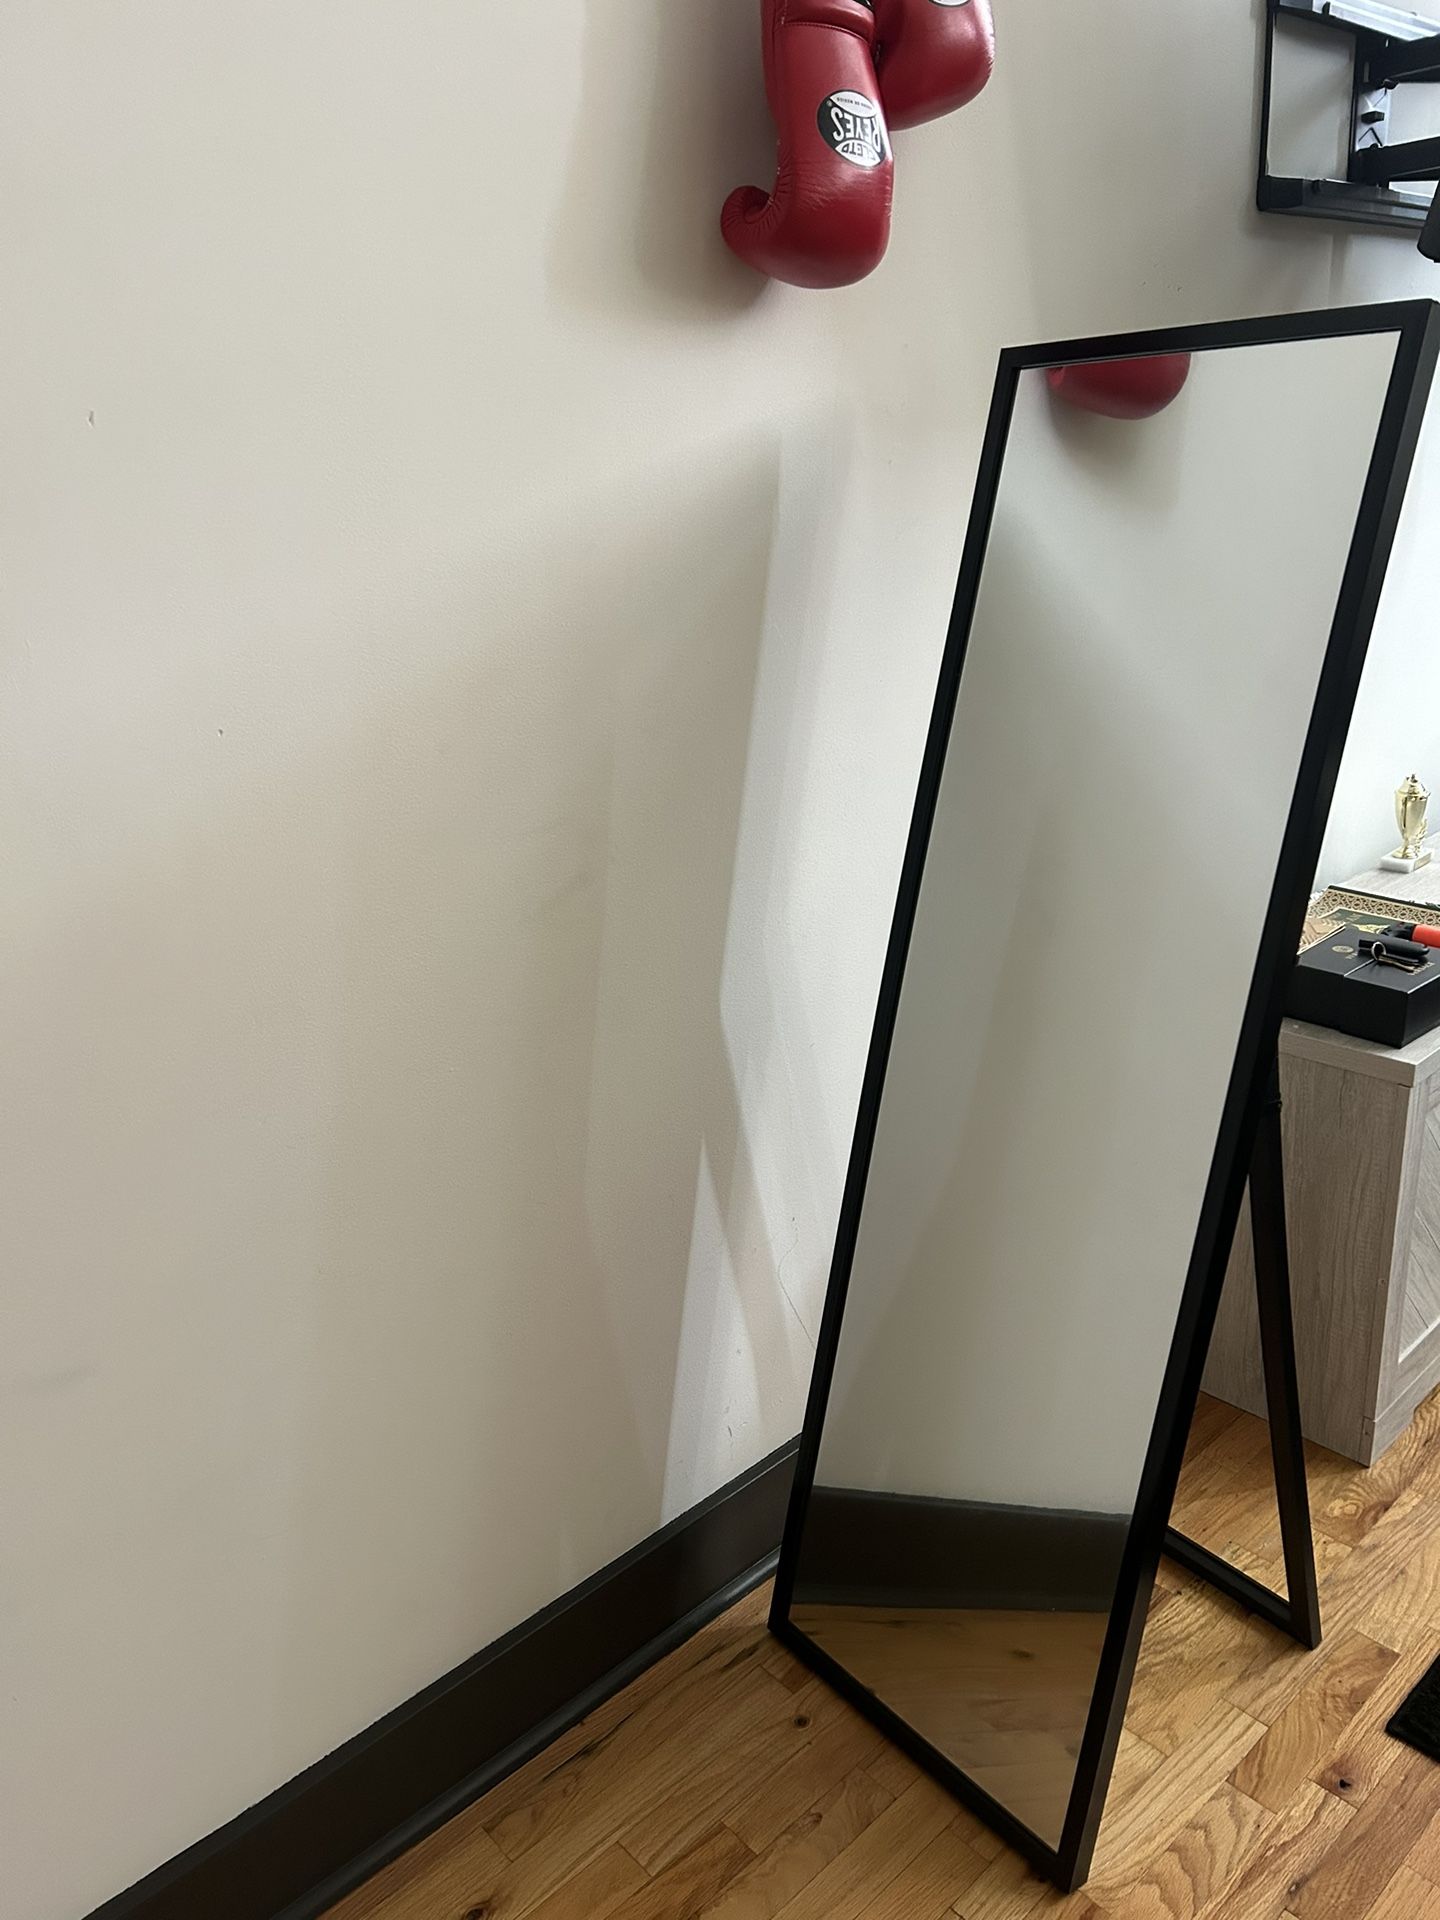 Mirror For Sale ! 